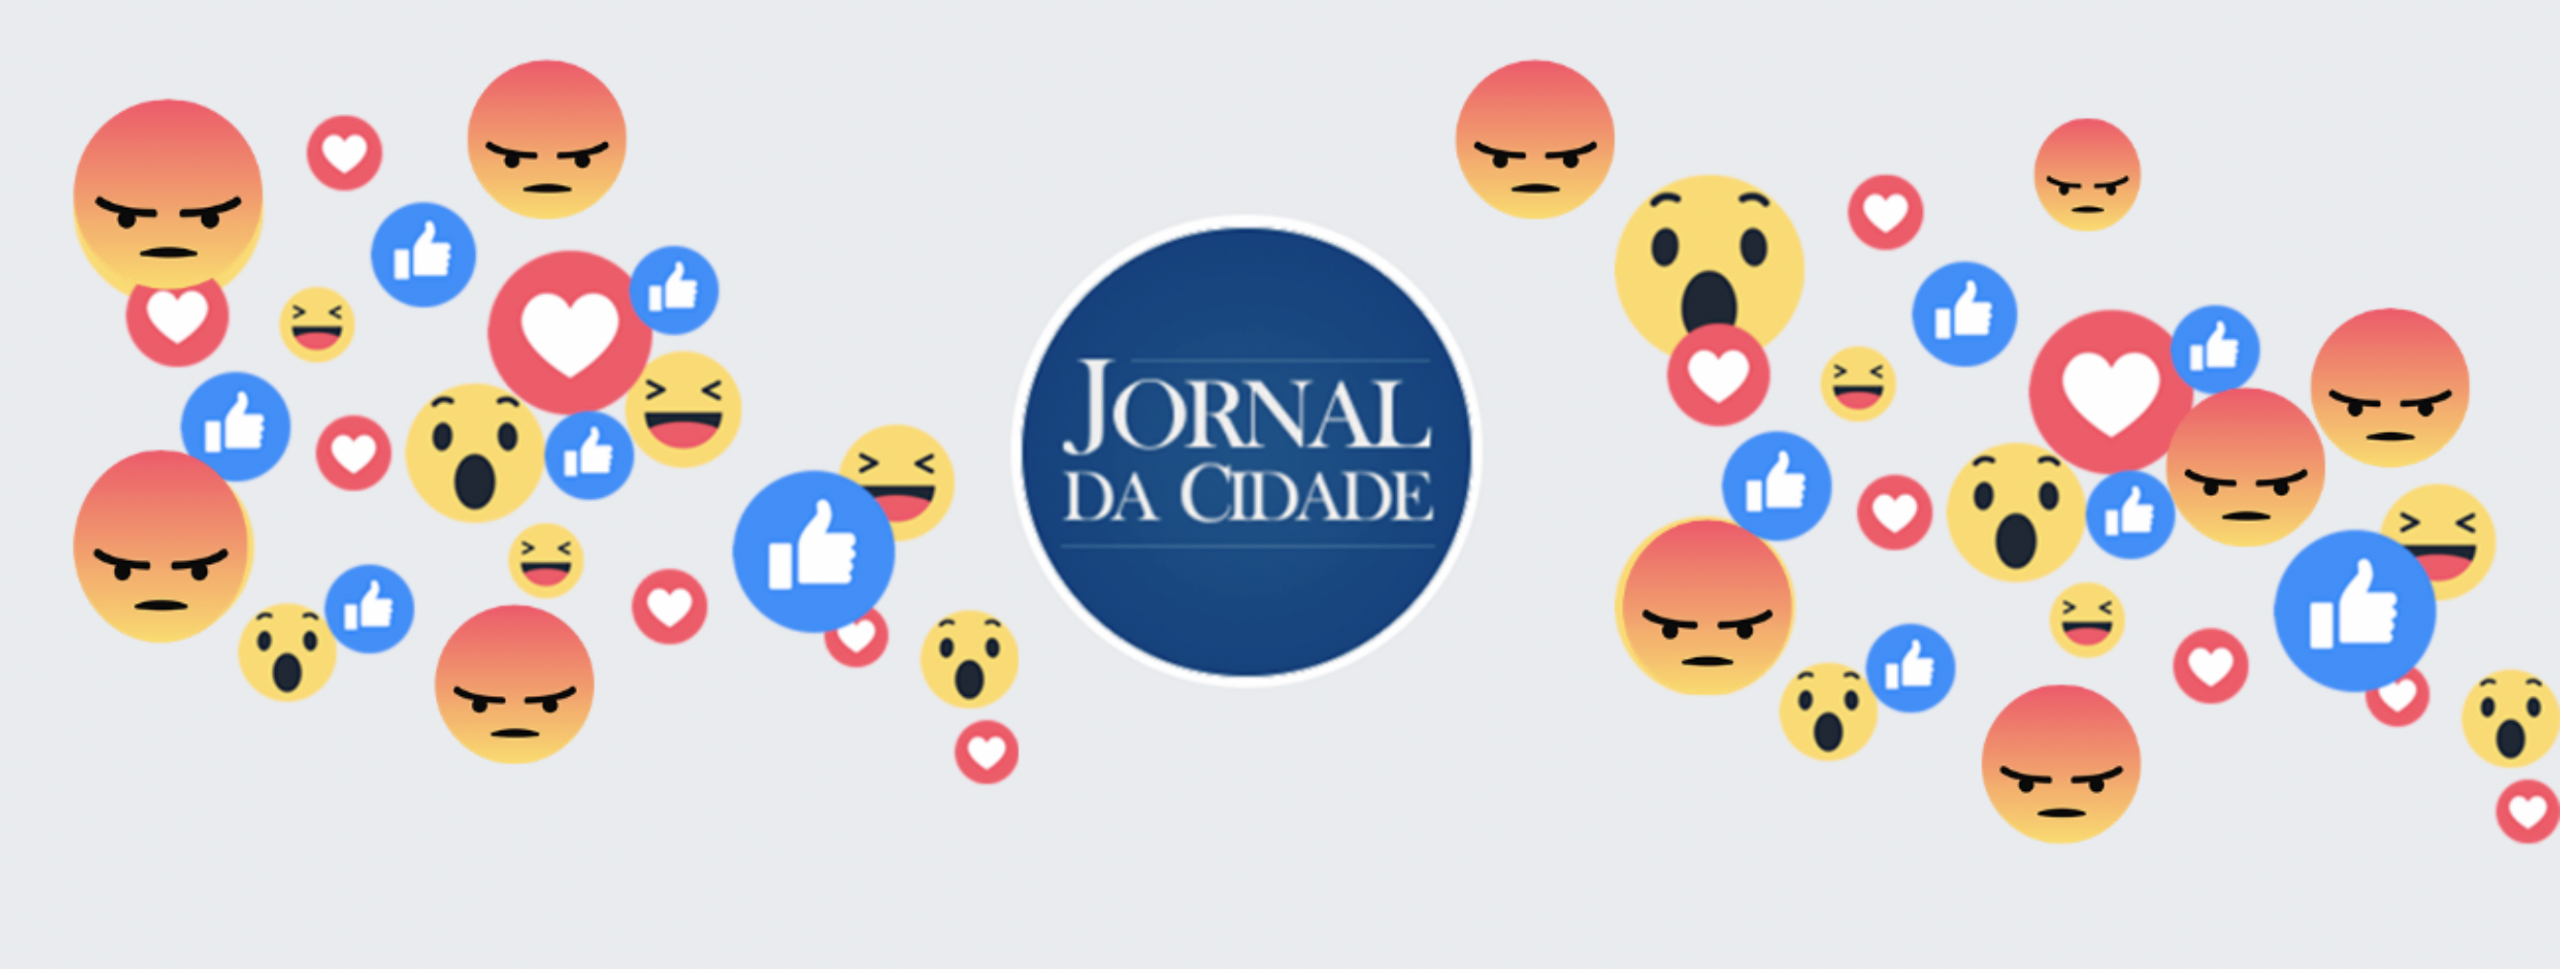 Pro-Bolsonaro website receives more Facebook engagement than traditional media on COVID-19 coverage